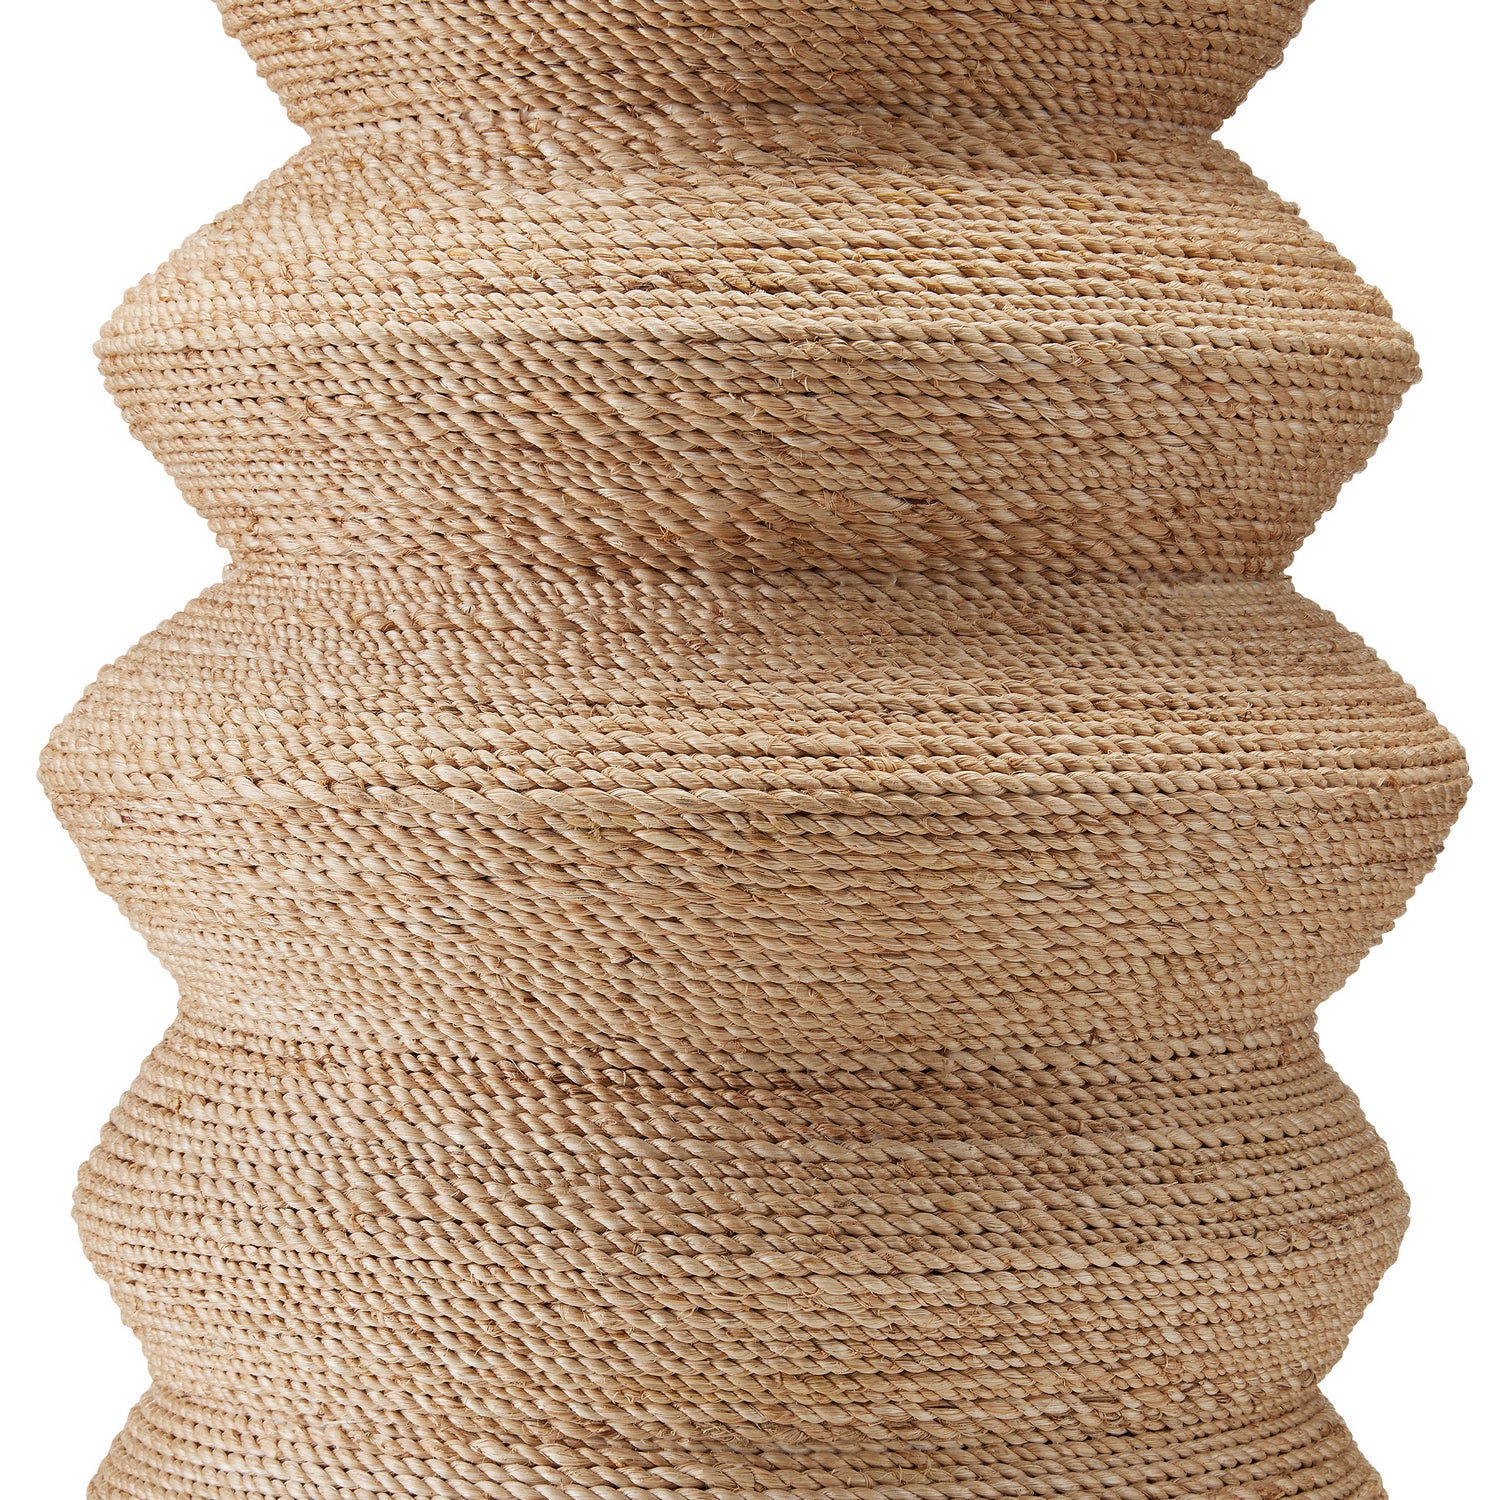 One Light Table Lamp from the Kavala collection in Natural Abaca Rope/Satin Black finish